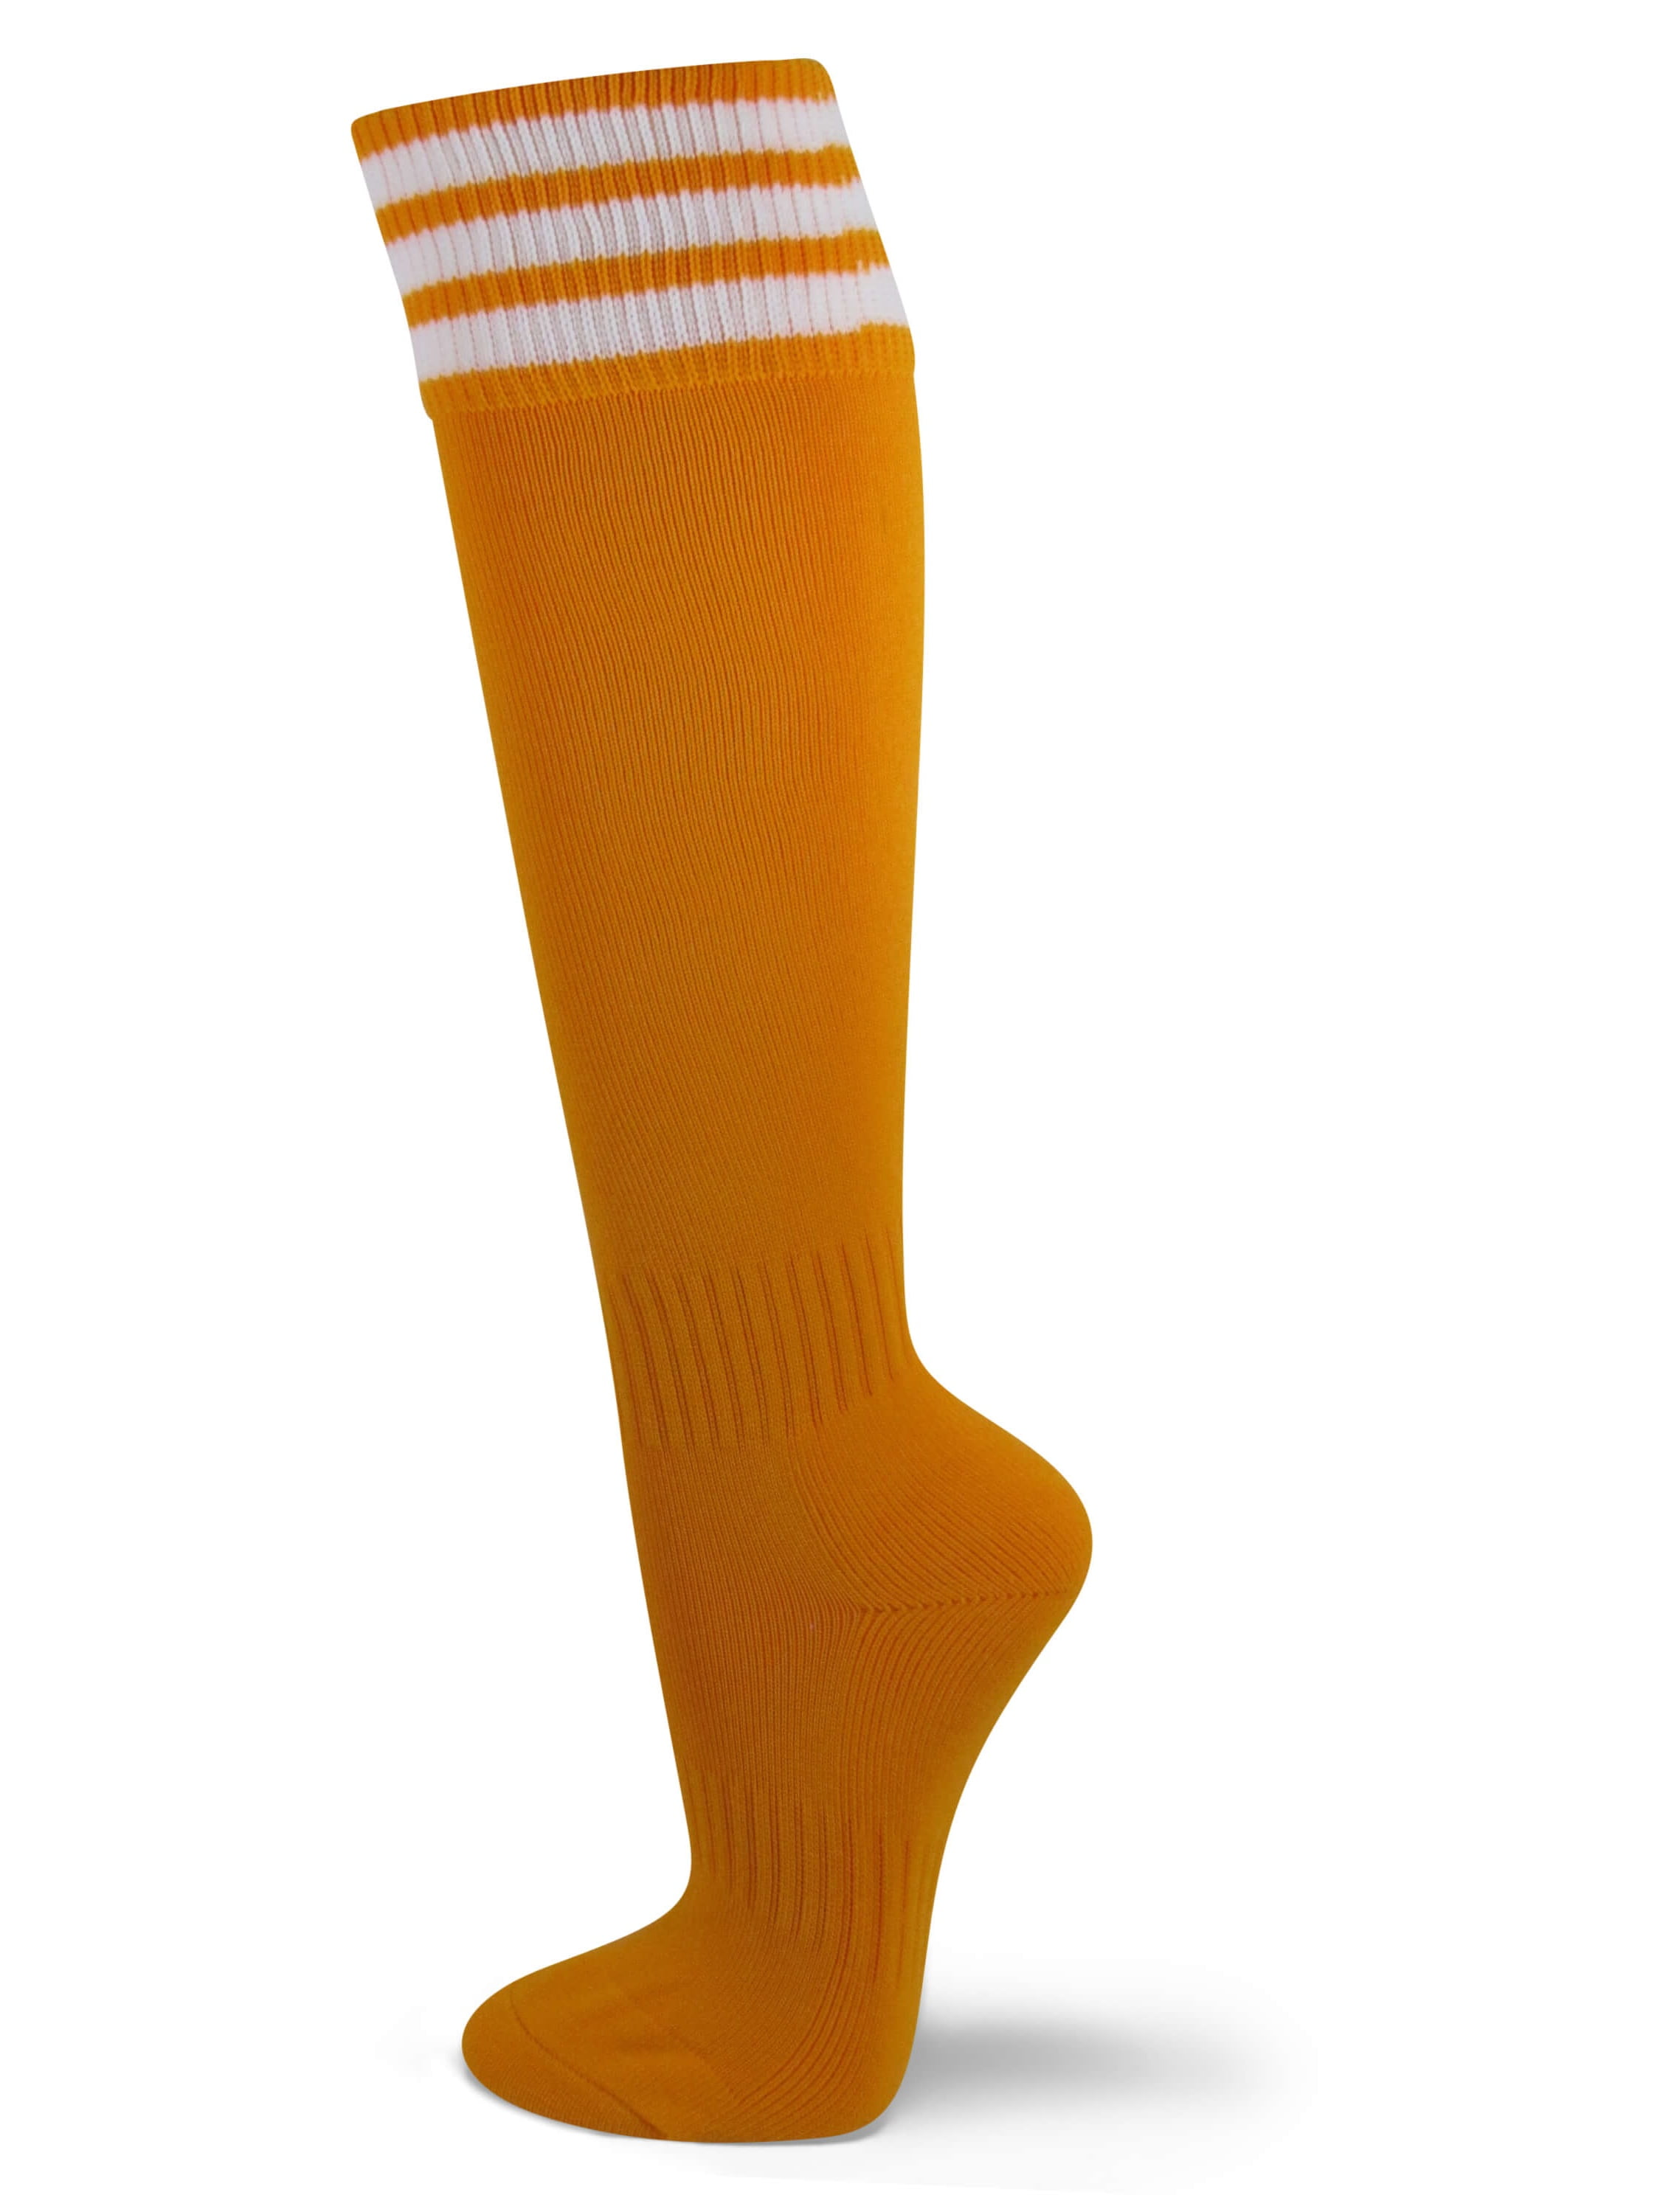 New 2020-2021 Soccer Socks Kids/Youth Football Socks Suitable for 6-14 Years Old 